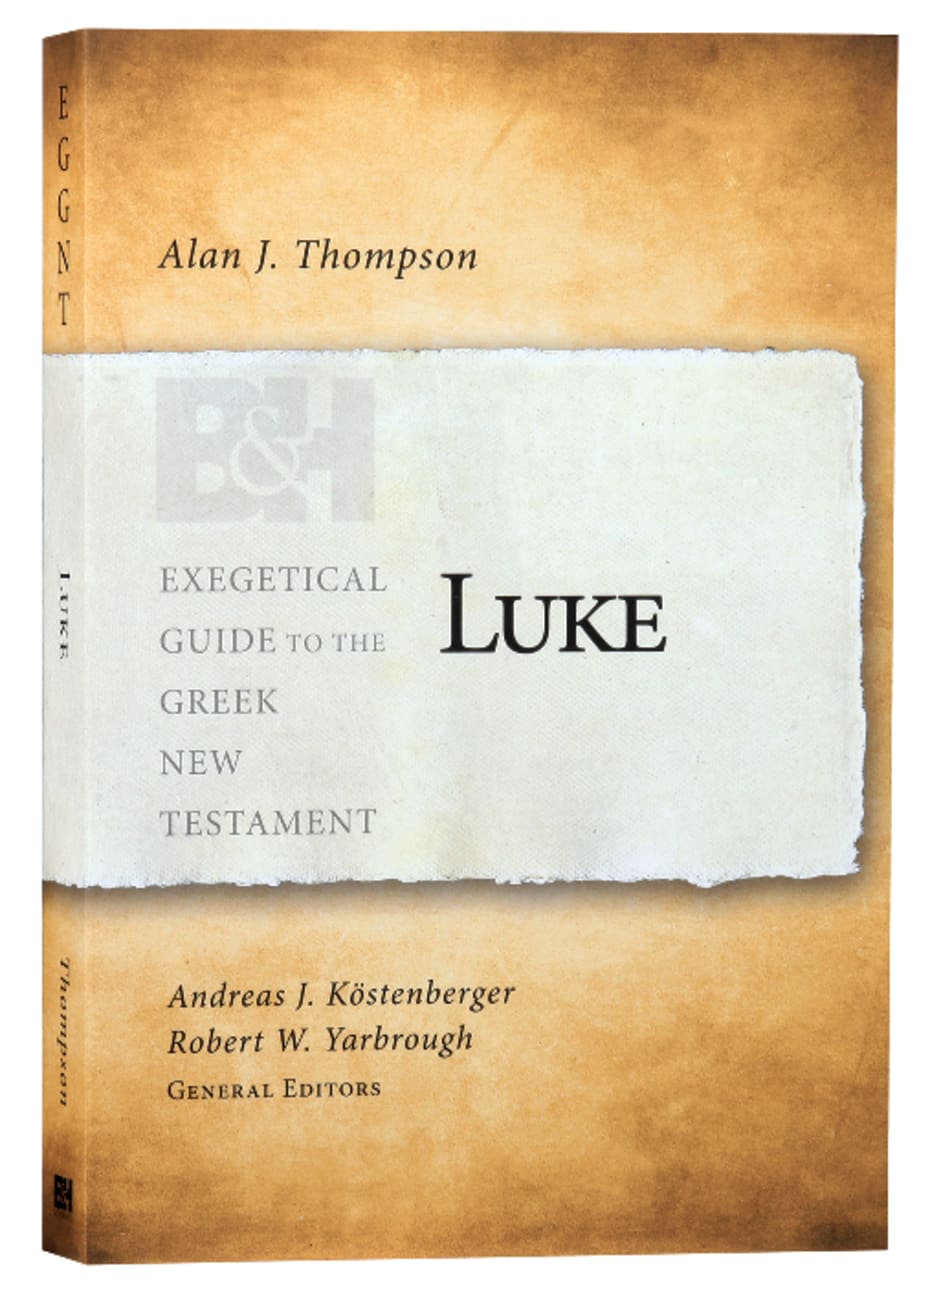 Luke (Exegetical Guide To The Greek New Testament Series) Paperback